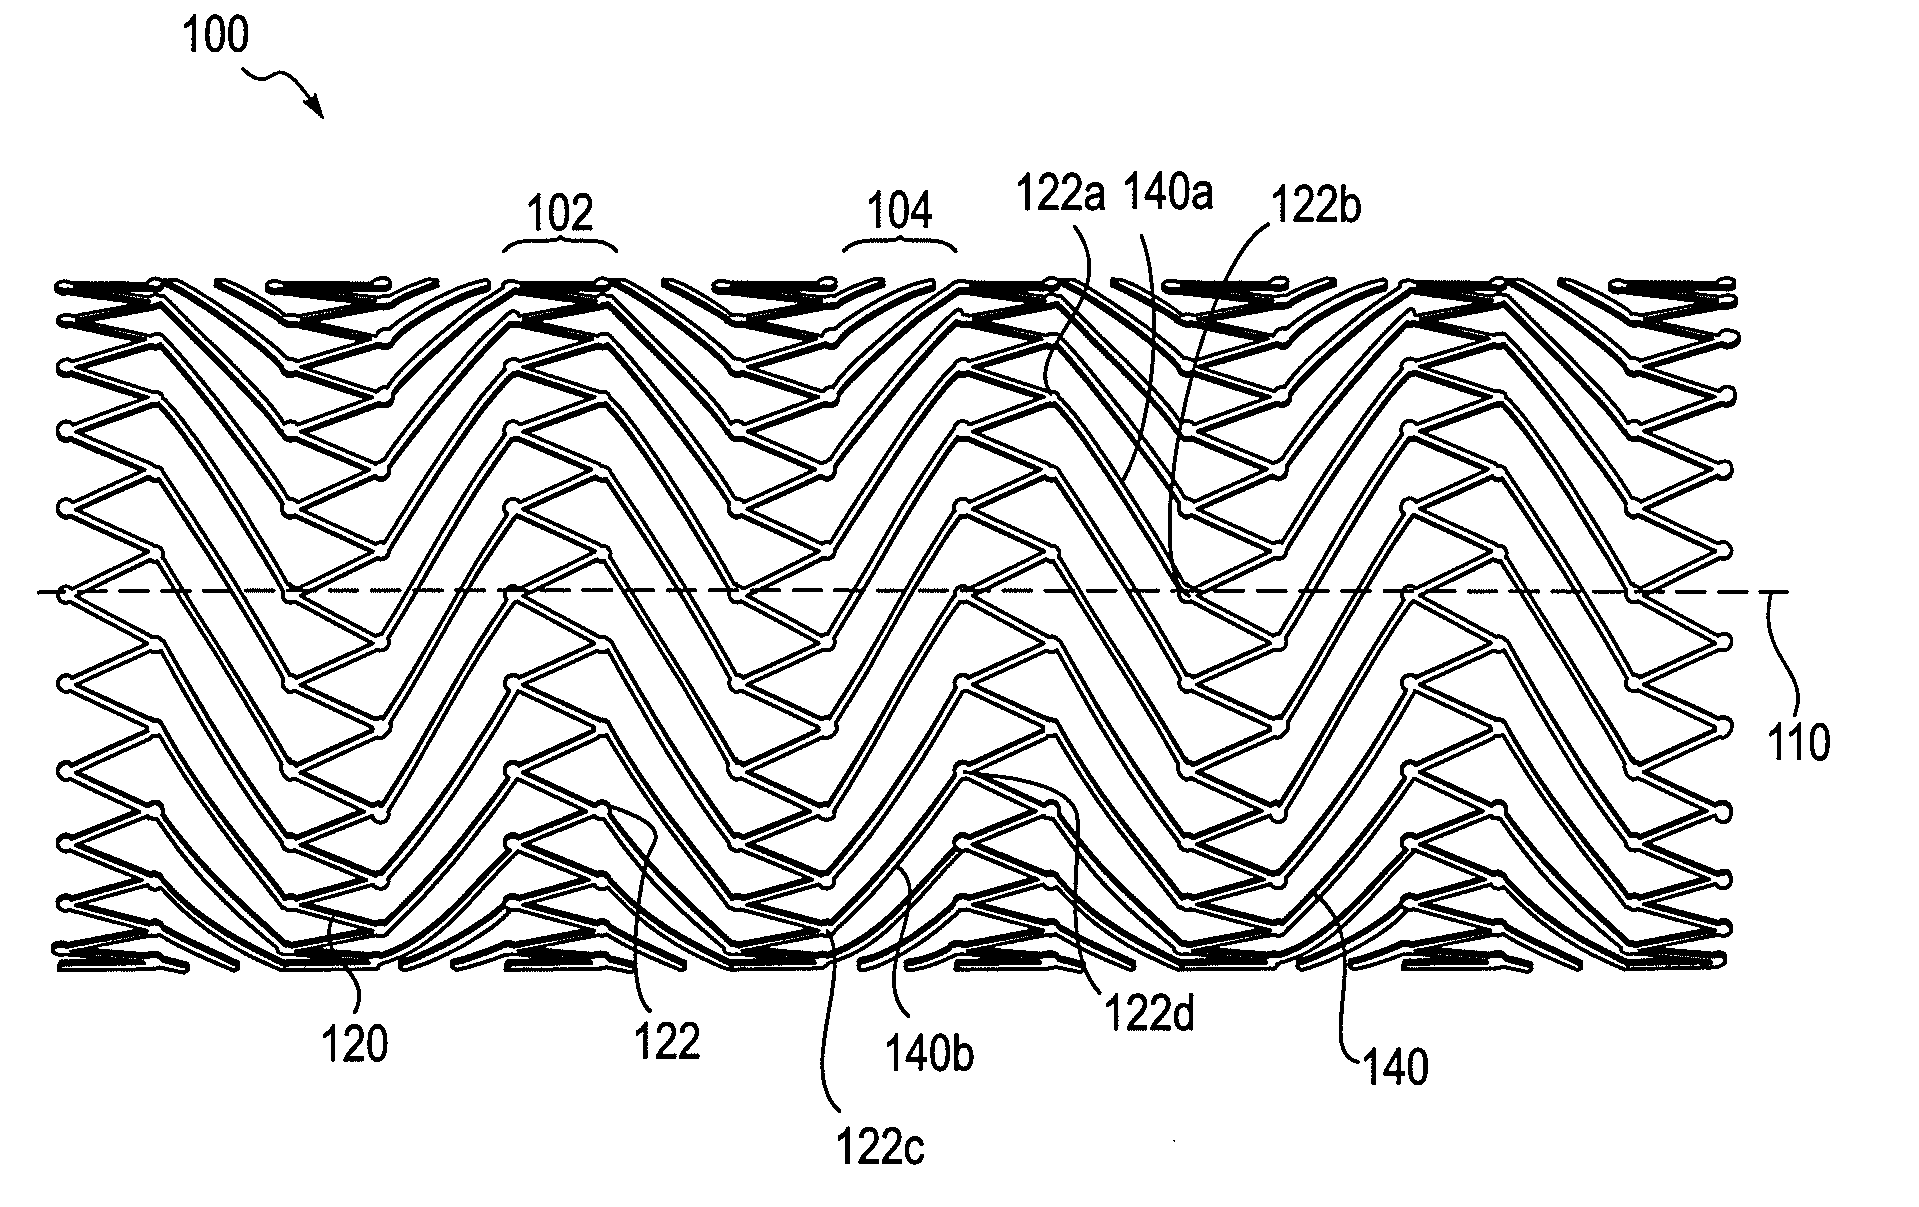 Alternating circumferential bridge stent design and methods for use thereof